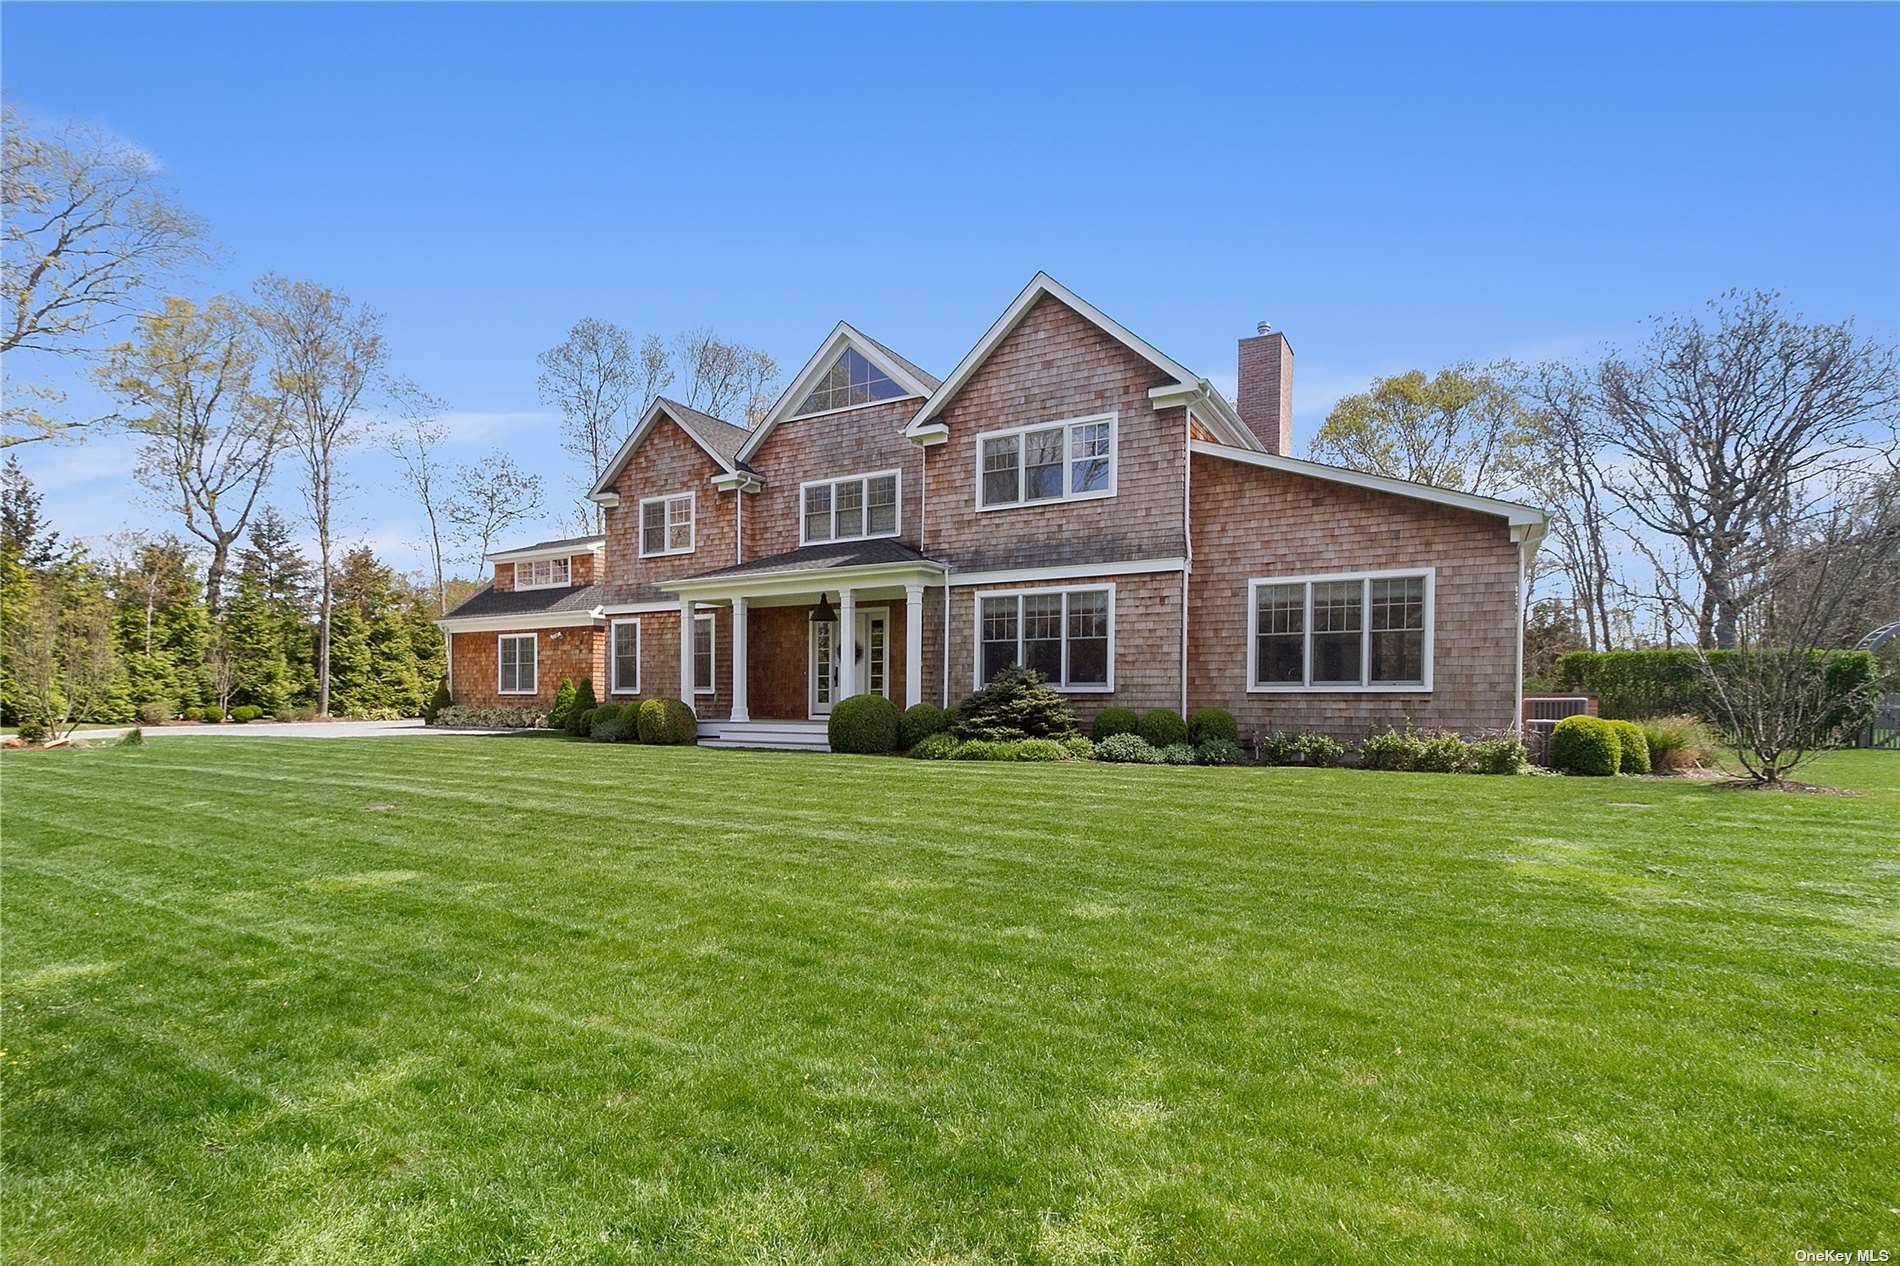 In the heart of Westhampton Beach Village, this spacious two story Postmodern has 5 bedrooms, 6.